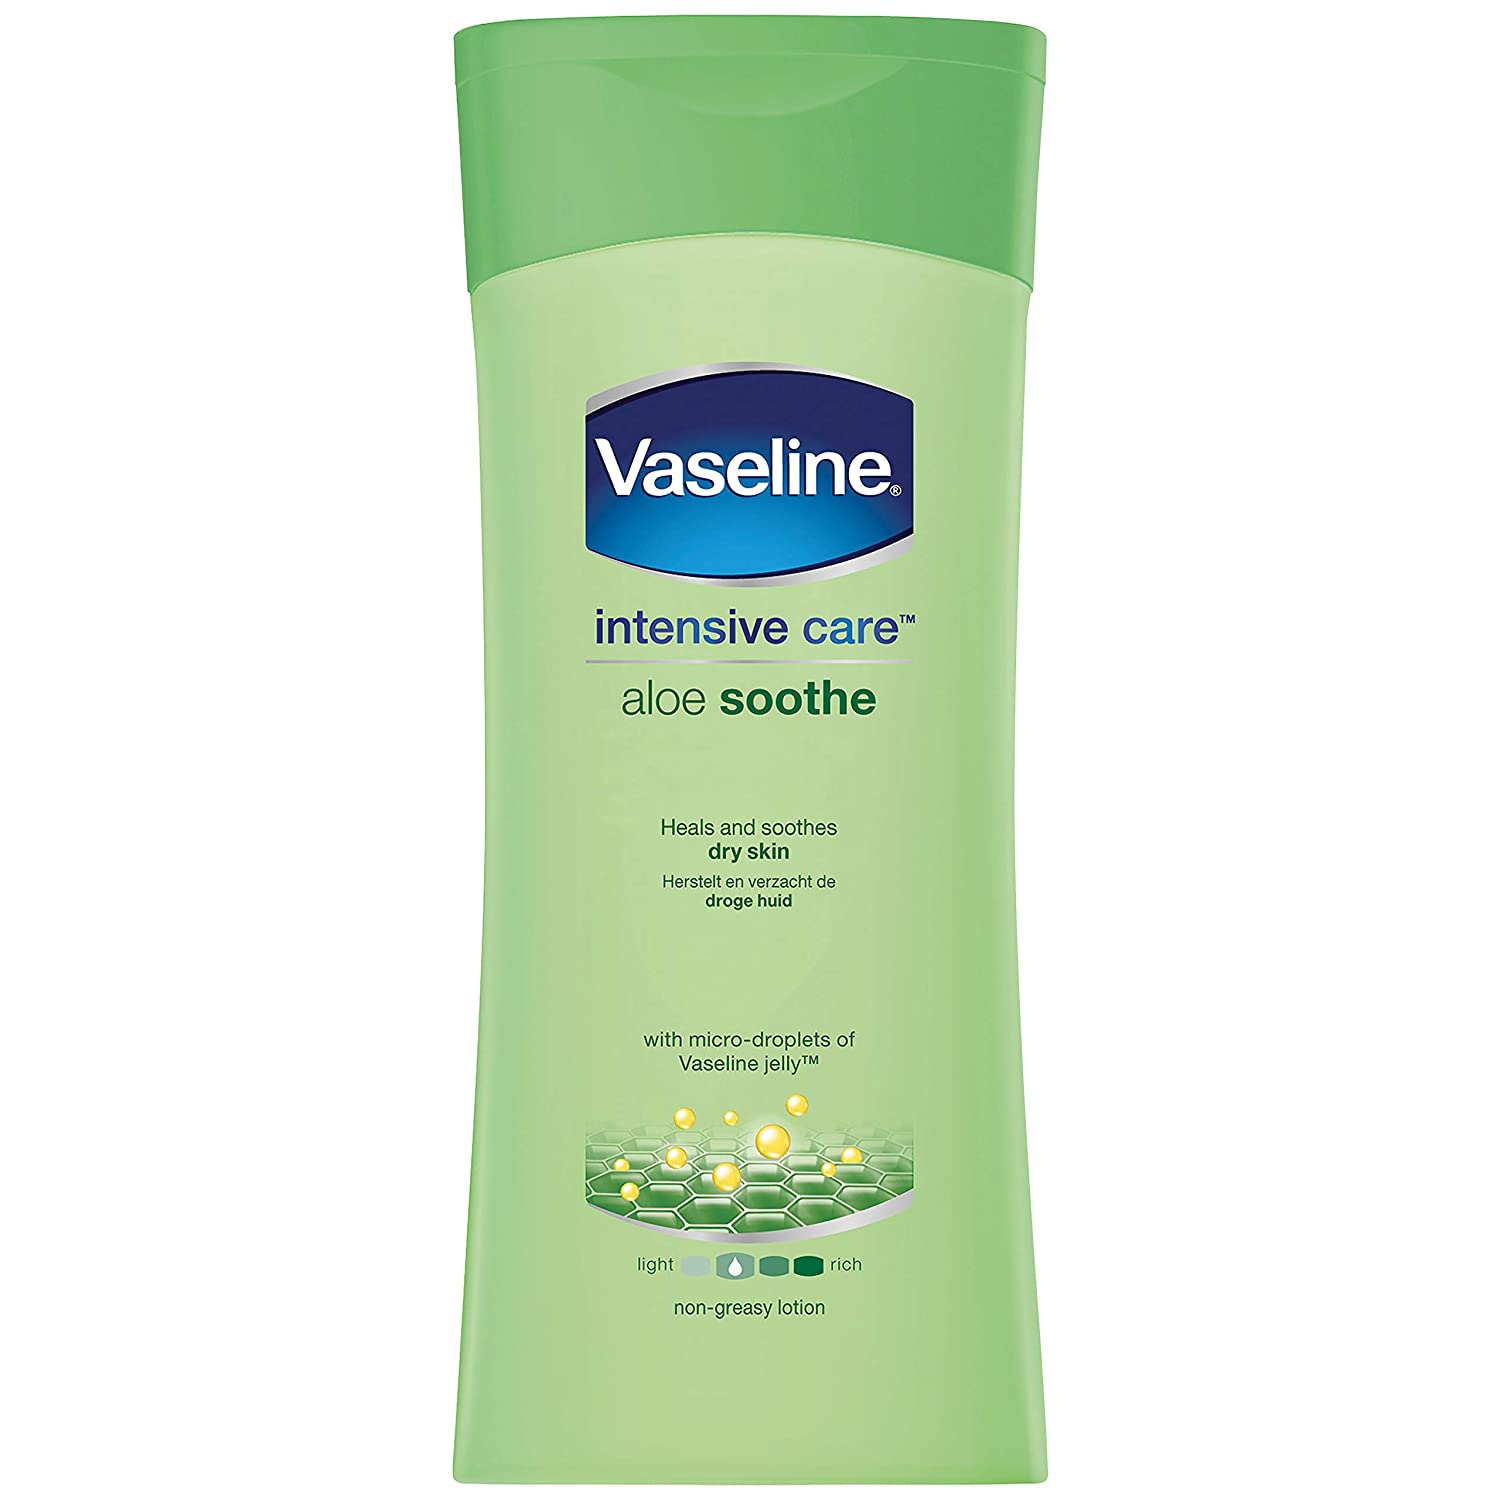 Vaseline Intensive Care Lotion Soothe Lotion 400ml -